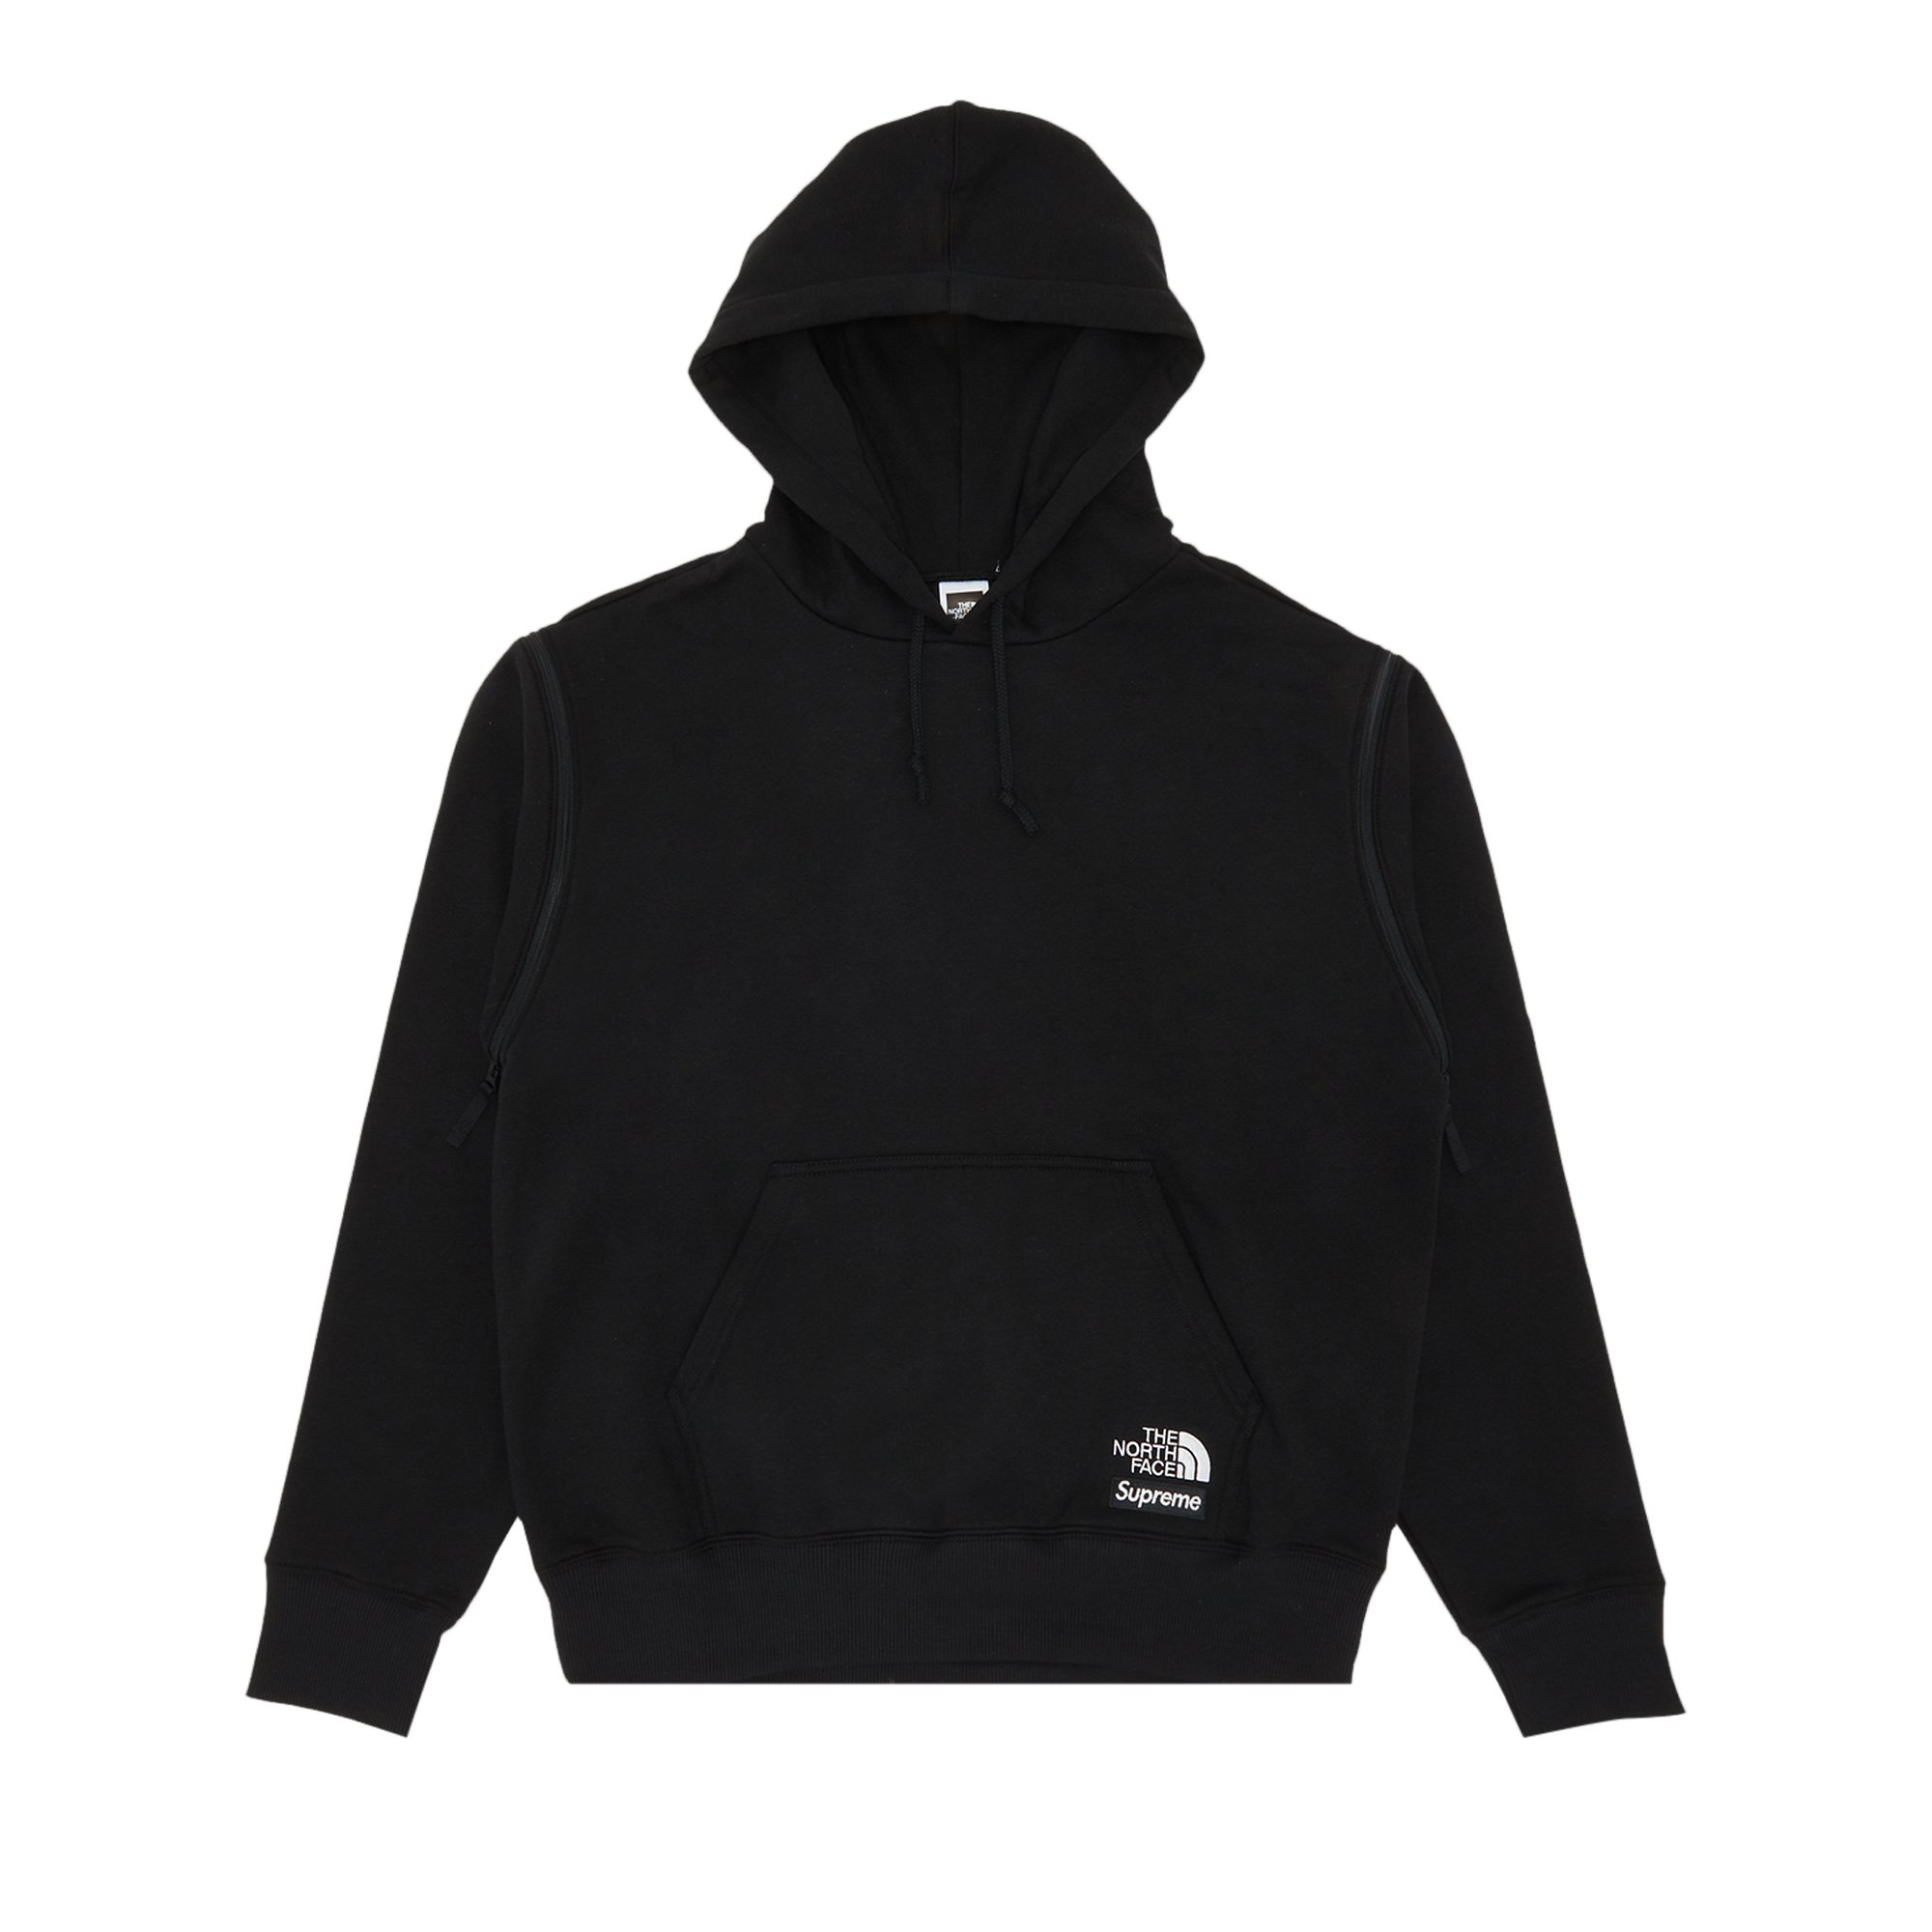 Supreme x The North Face Convertible Hooded Sweatshirt 'Black'